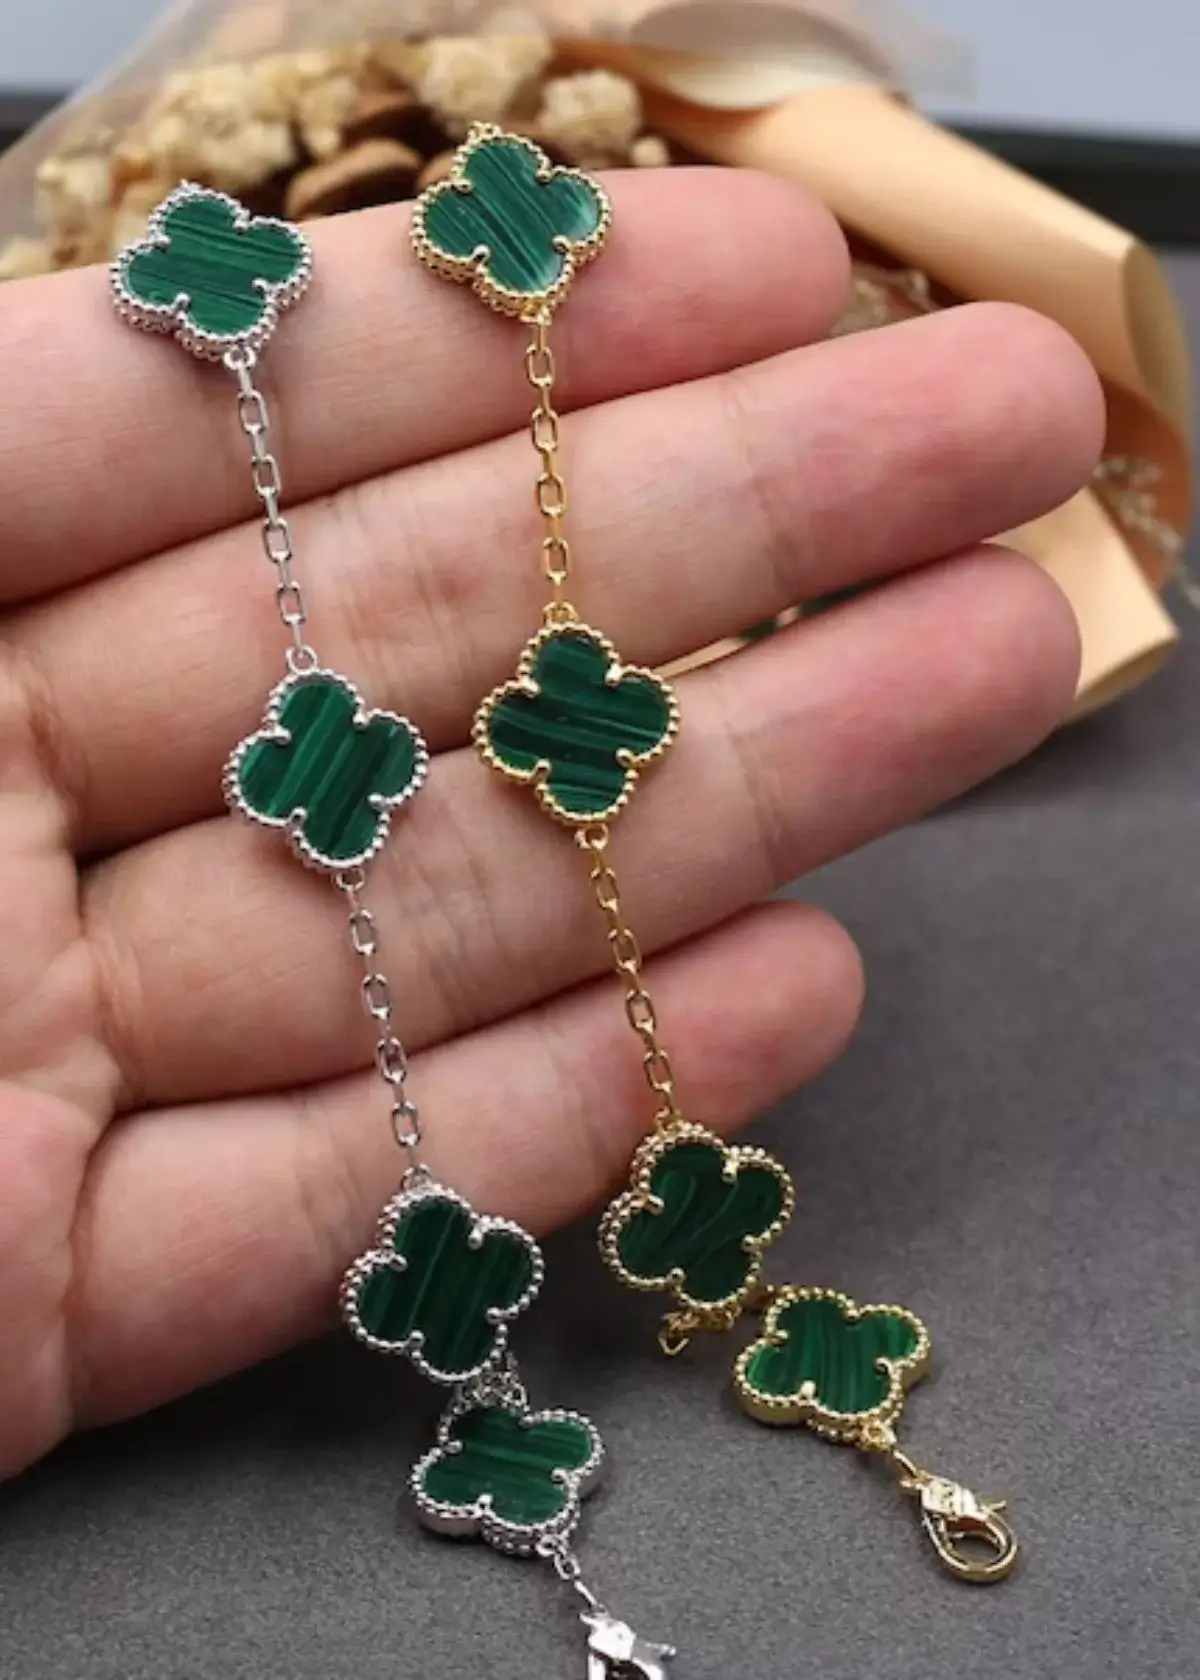 Where did the idea for Clover Bracelets come from?